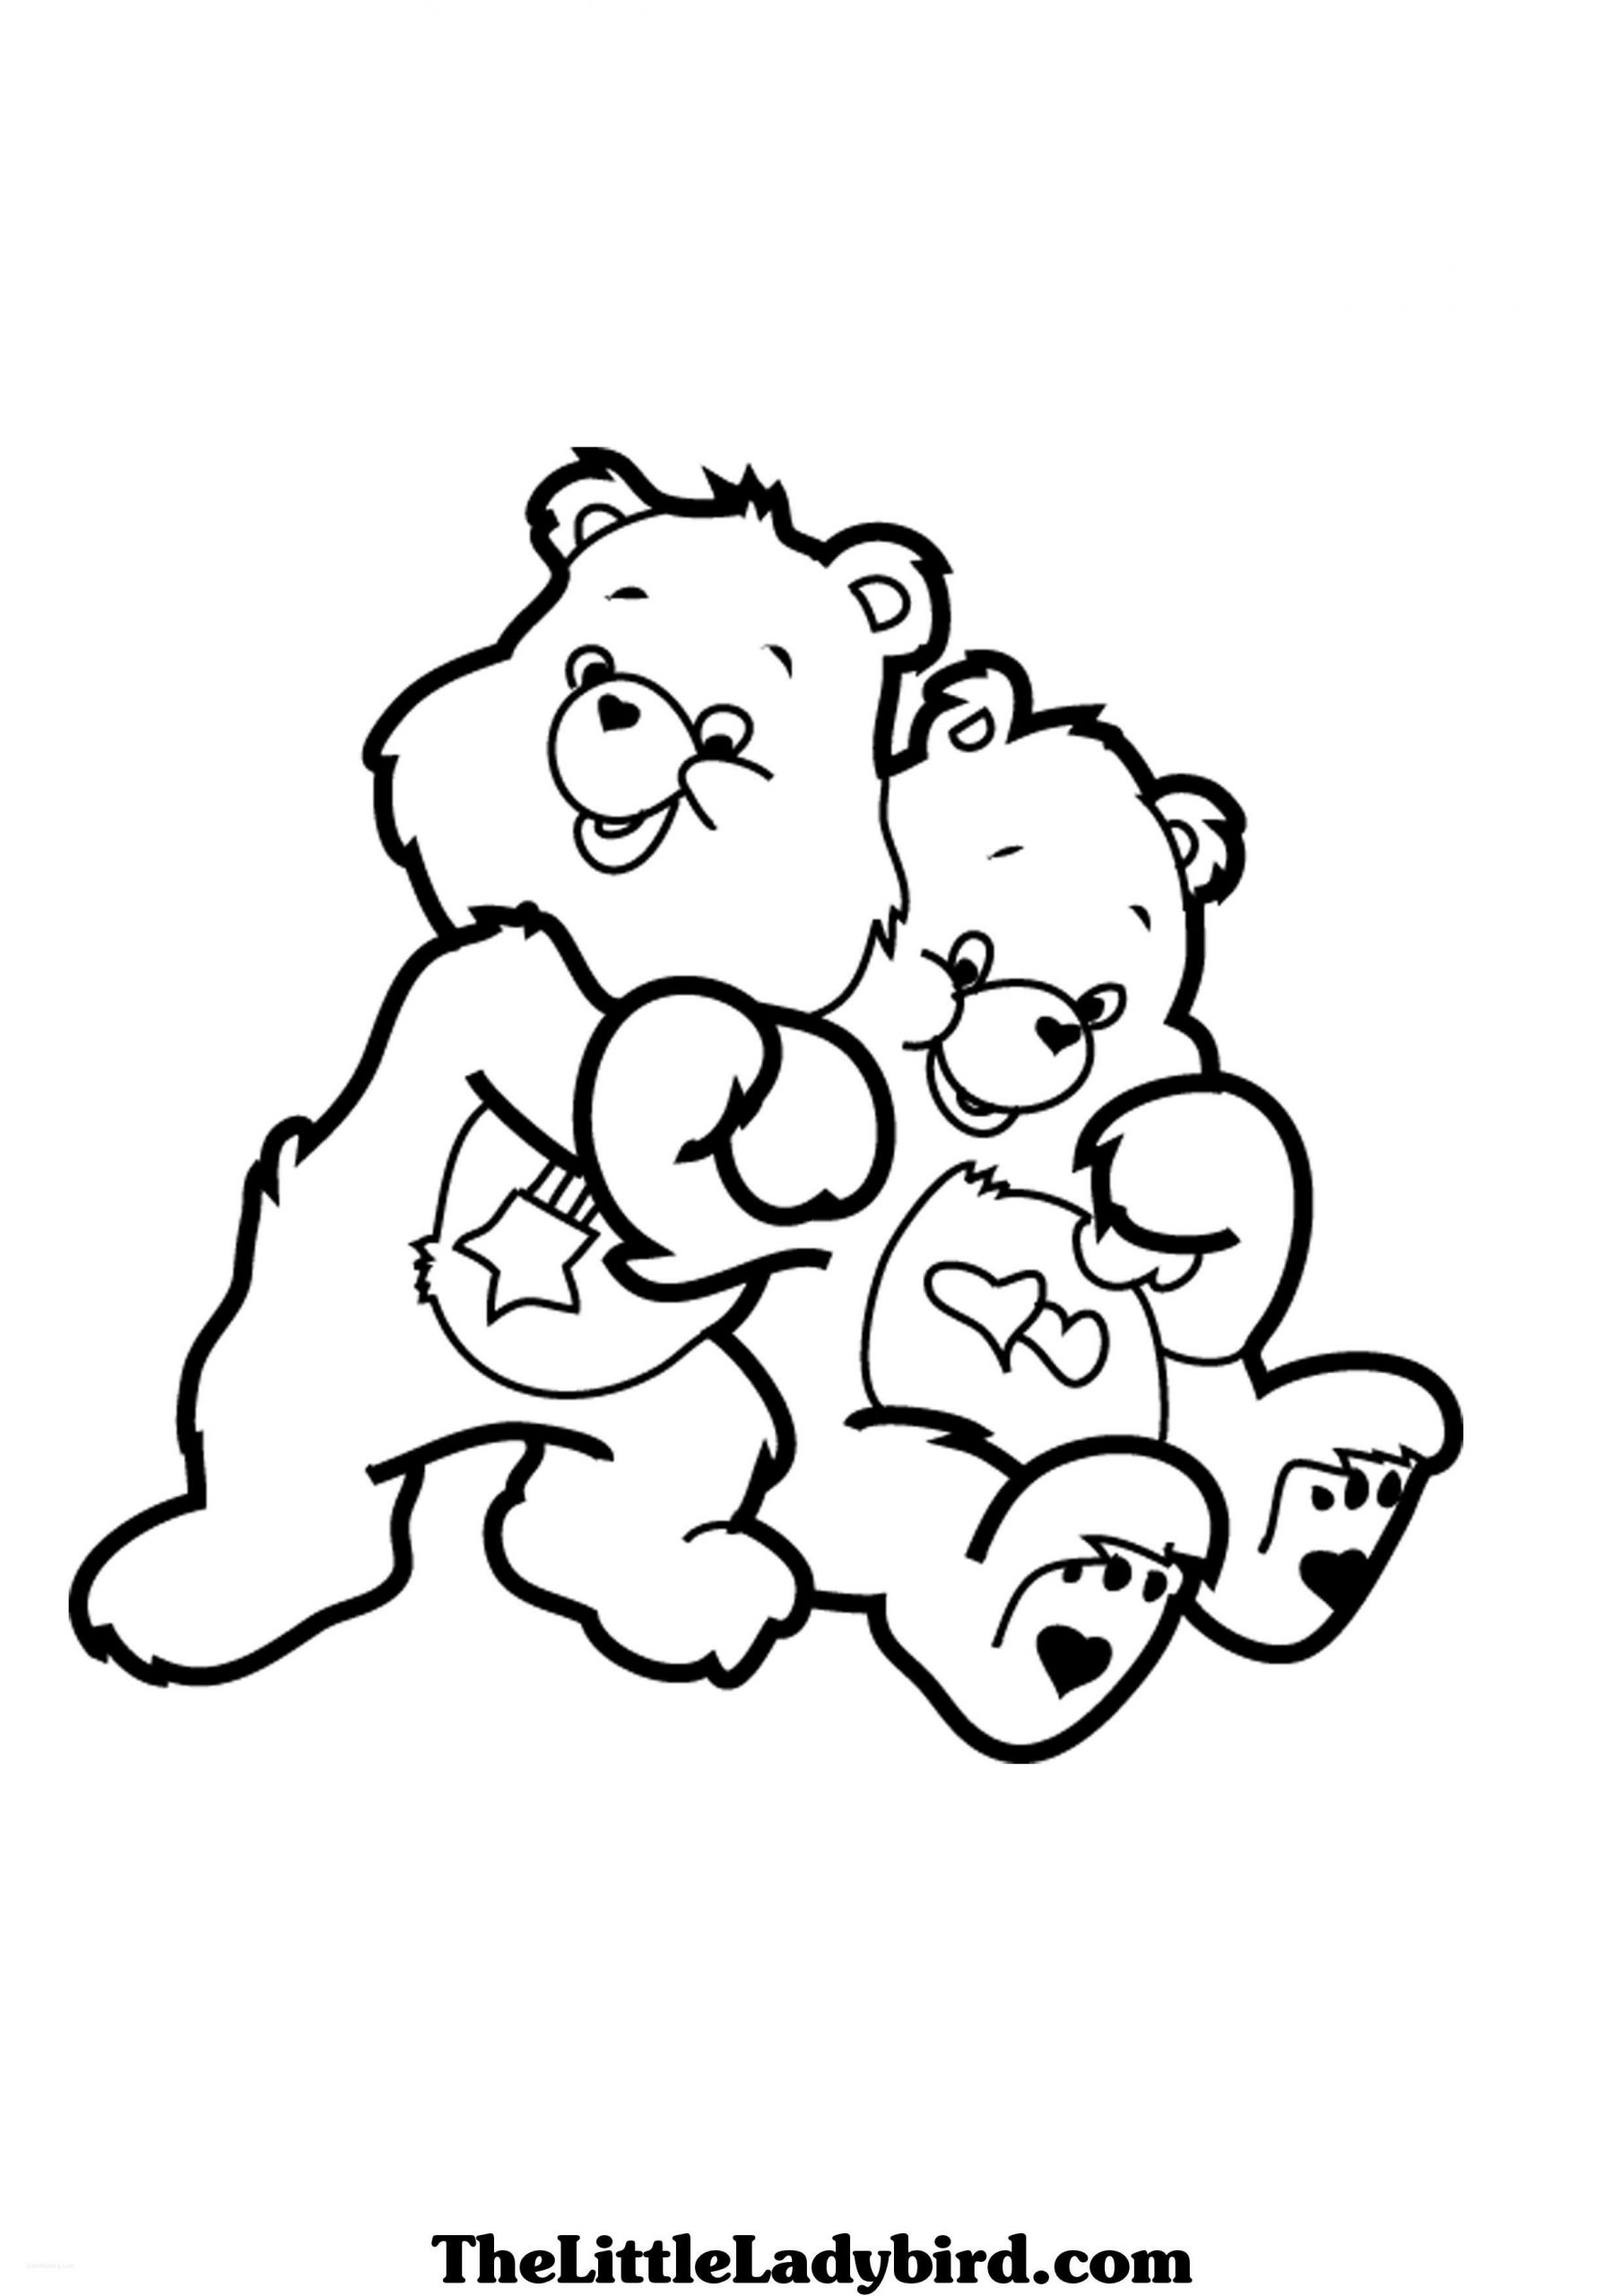 coloring pages : Care Bear Coloring Pages Lovely 31 I Love The 80s Coloring  Pages Care Bear Coloring Pages ~ peak